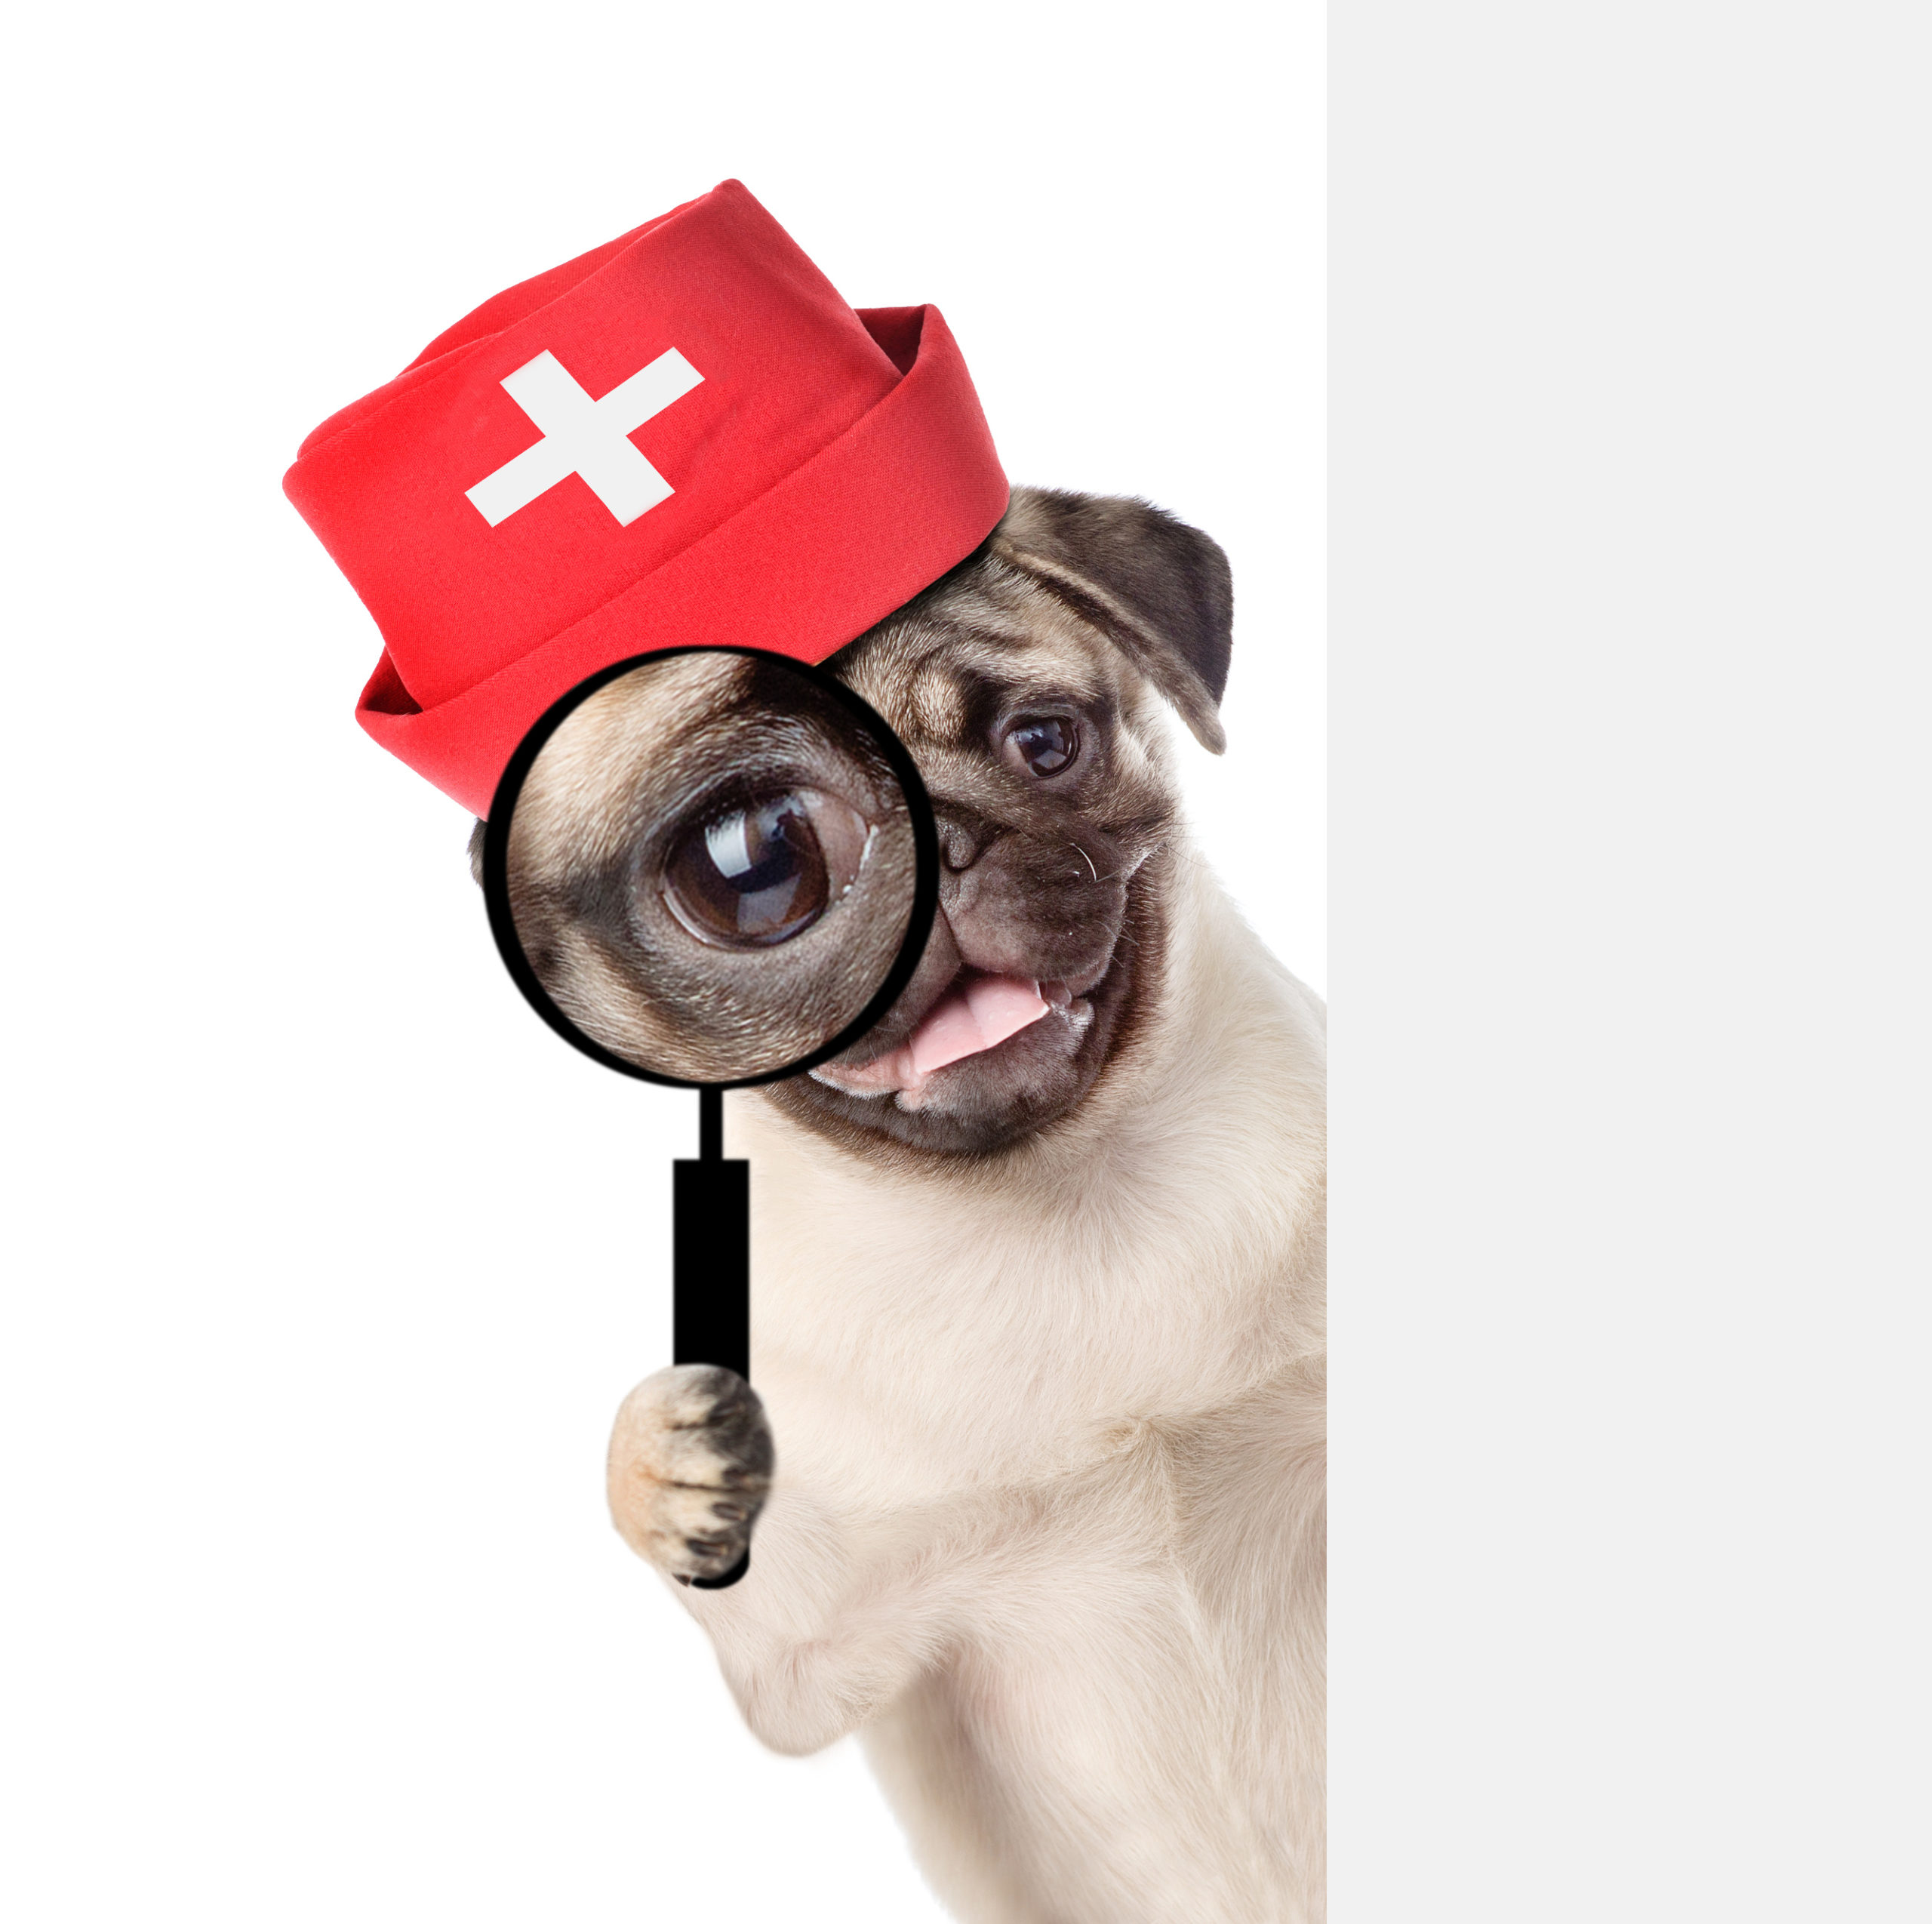 Pug with a magnifying glass